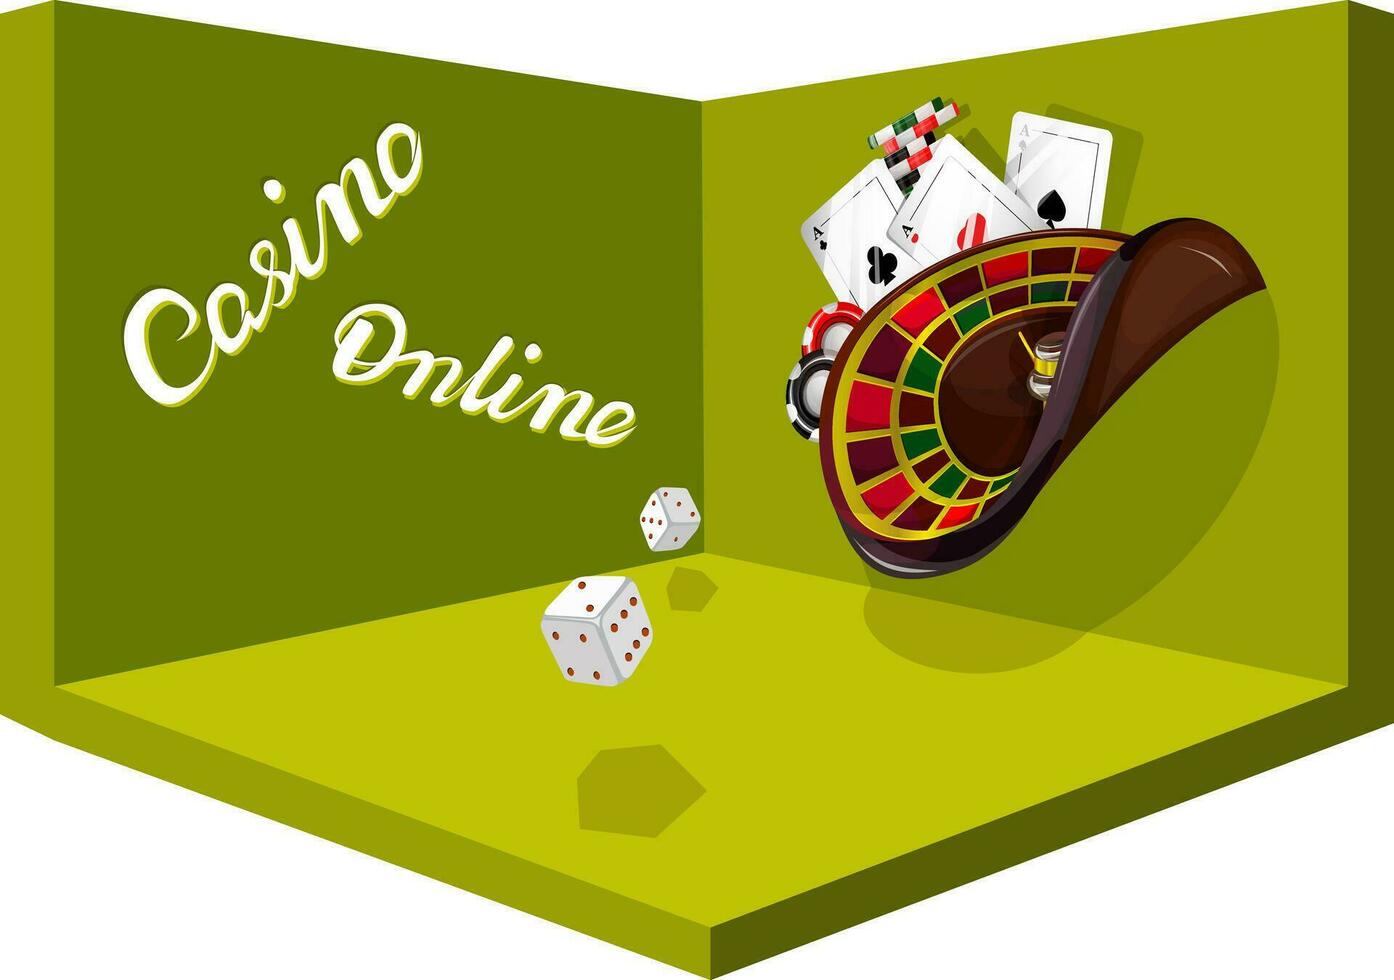 Vector conceptual image for a gambling establishment. Playing cards, poker chips, roulette seem to float in zero gravity. Poker gambling mobile app icon. EPS 10